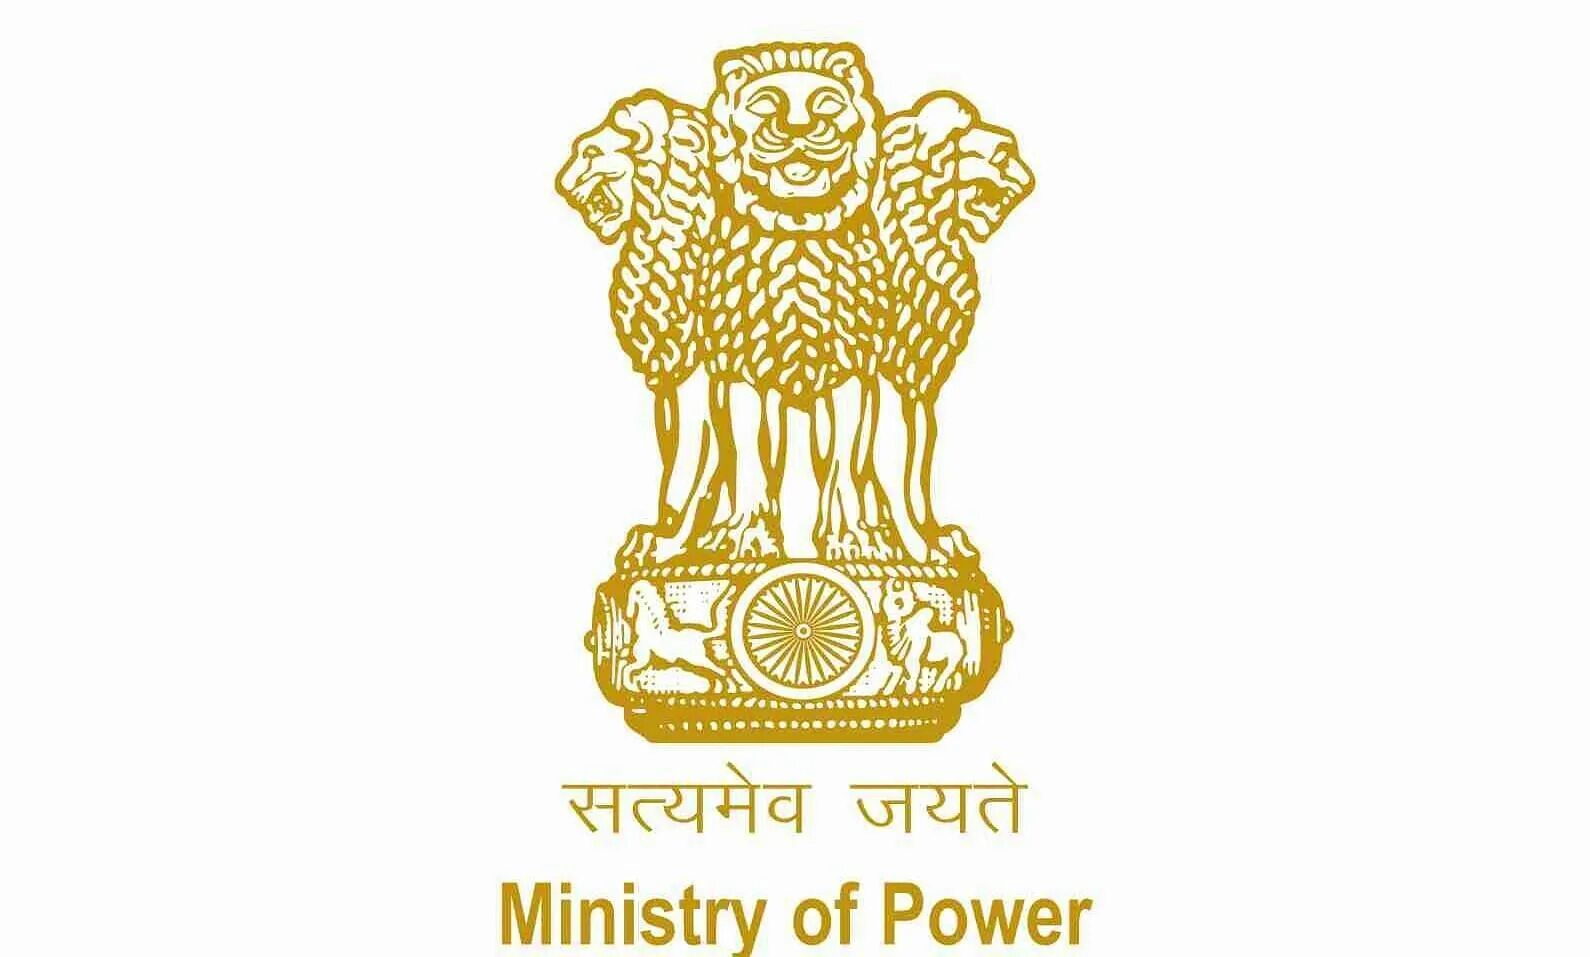 Indian government. Ministry of Defence (India). Посольство Индии лого. Government of the Day.